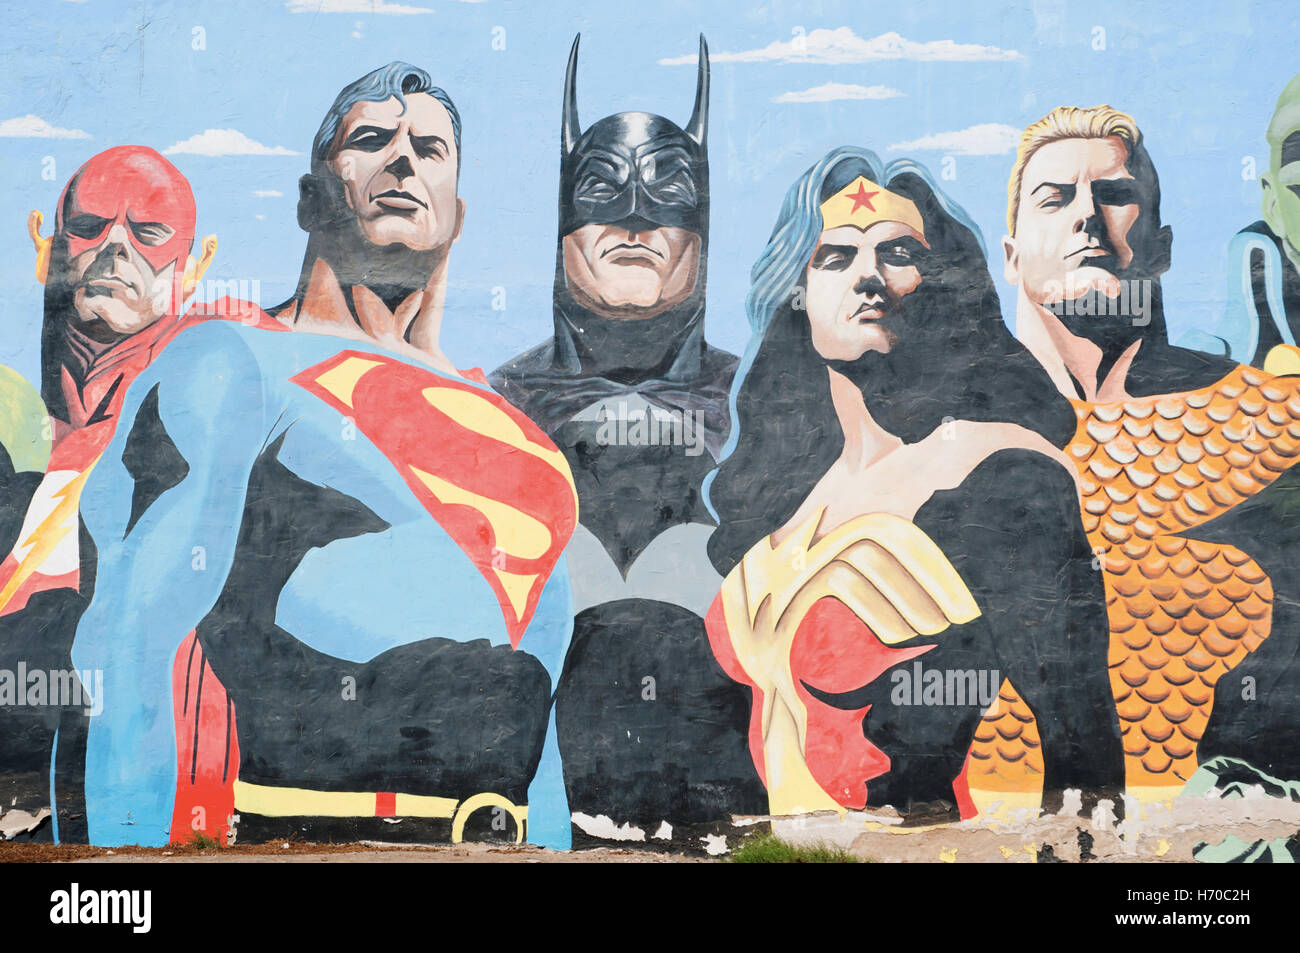 Fuerteventura, Canary Islands, Spain: a big mural with superheroes on a wall in Puerto del Rosario, the capital of the island Stock Photo